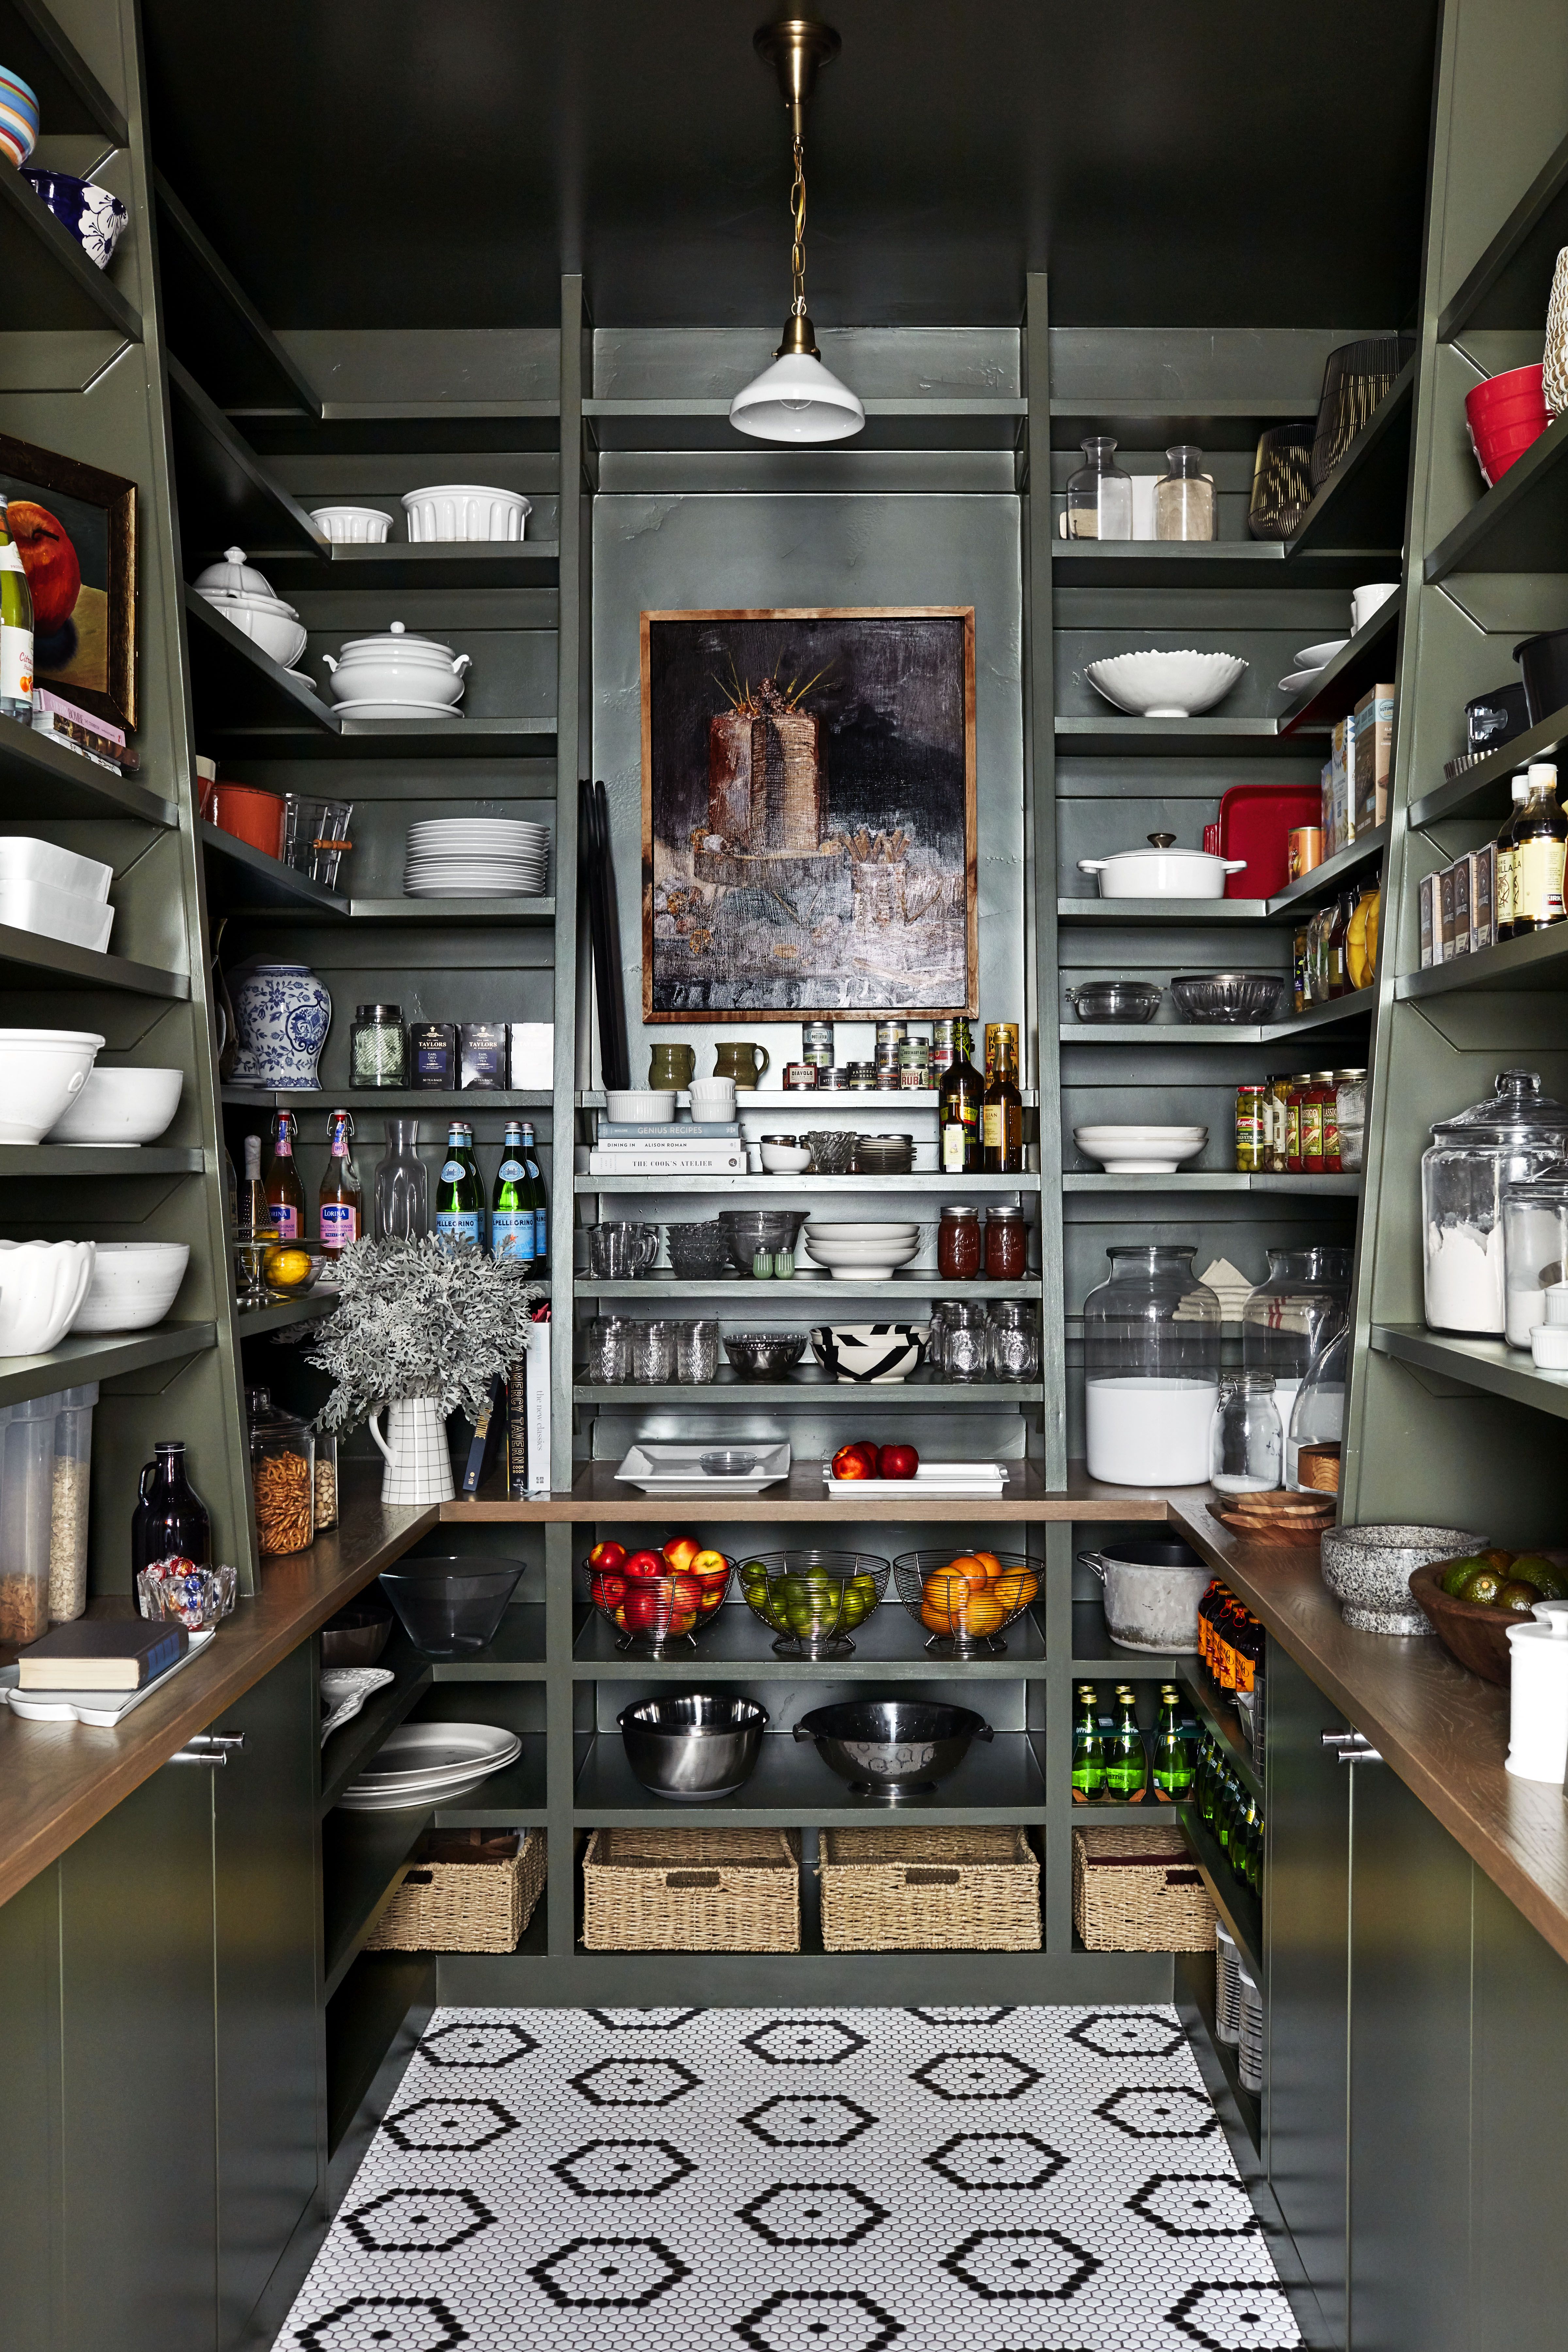 Pantry Cleaning Checklist How To, How To Clean Wire Pantry Shelves